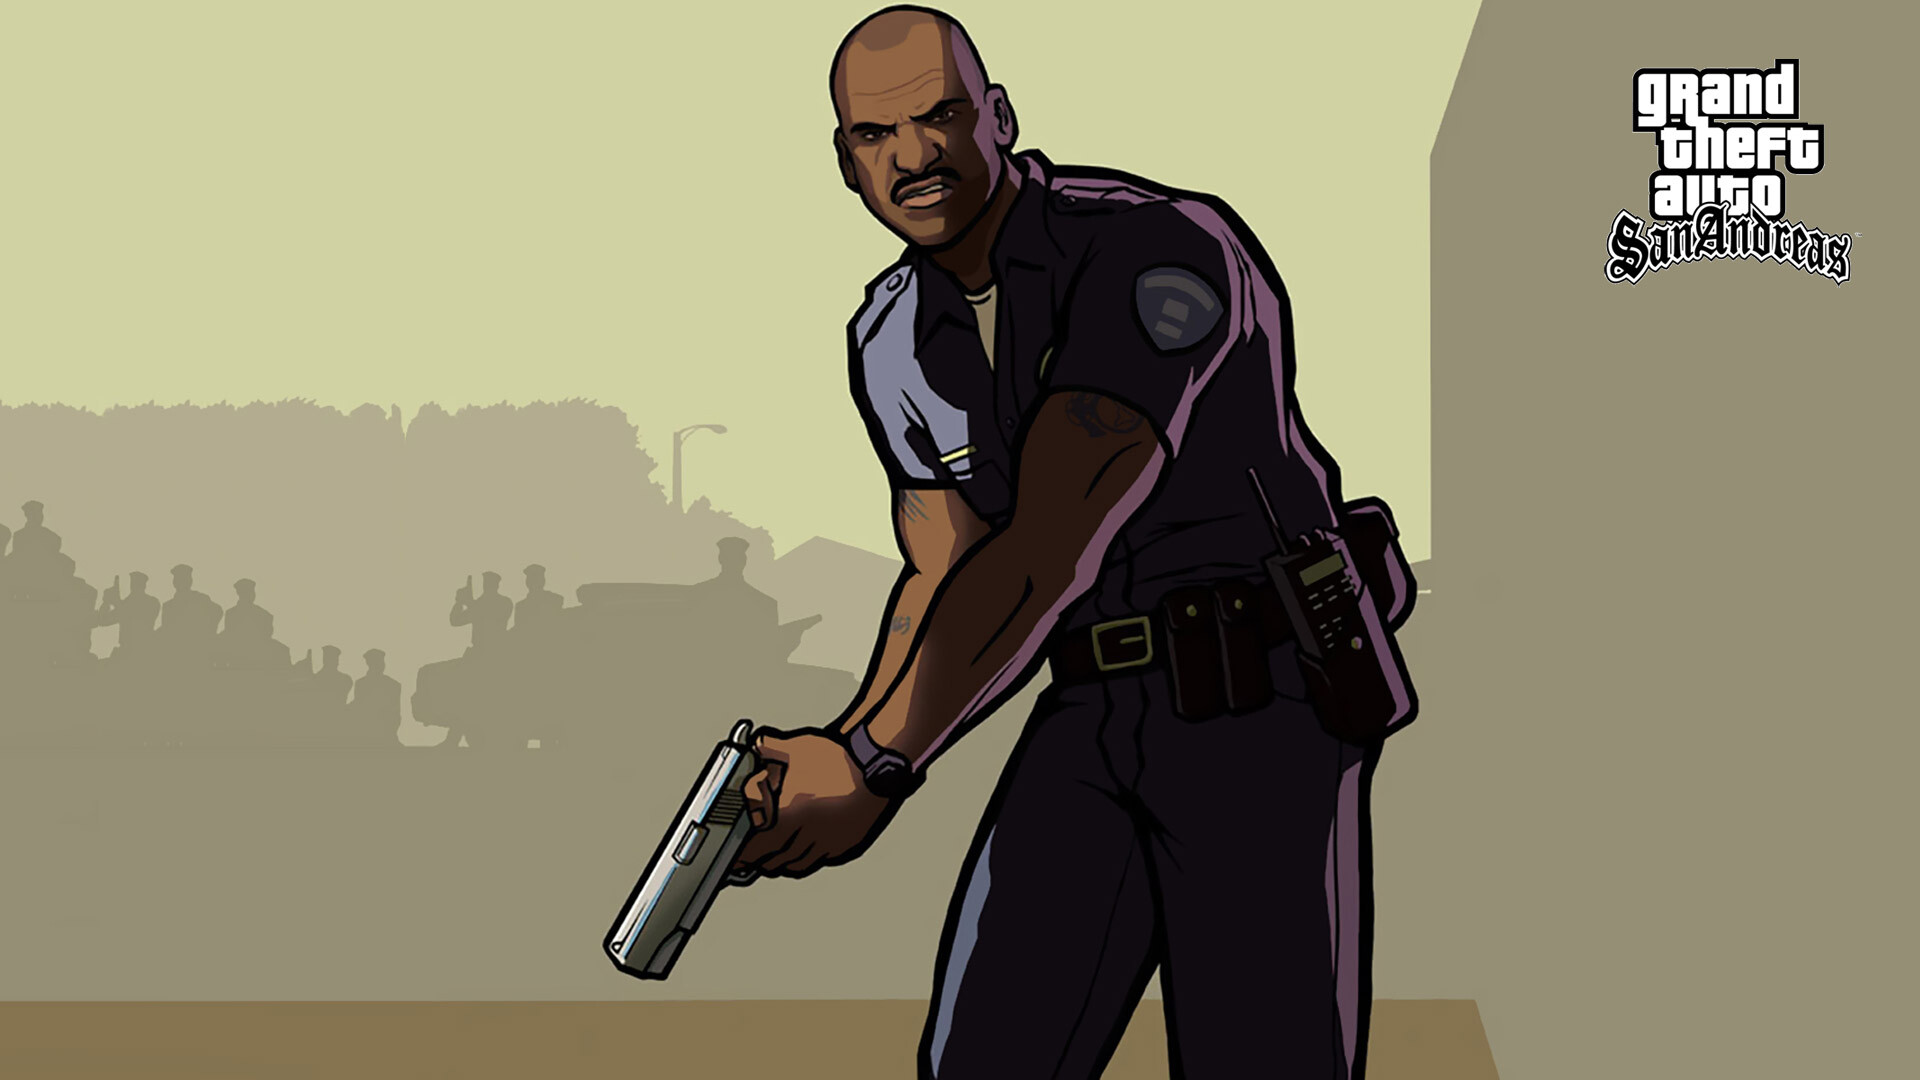 Grand Theft Auto: San Andreas: Frank Tenpenny, An officer of the Los Santos Police Department, GTA. 1920x1080 Full HD Wallpaper.